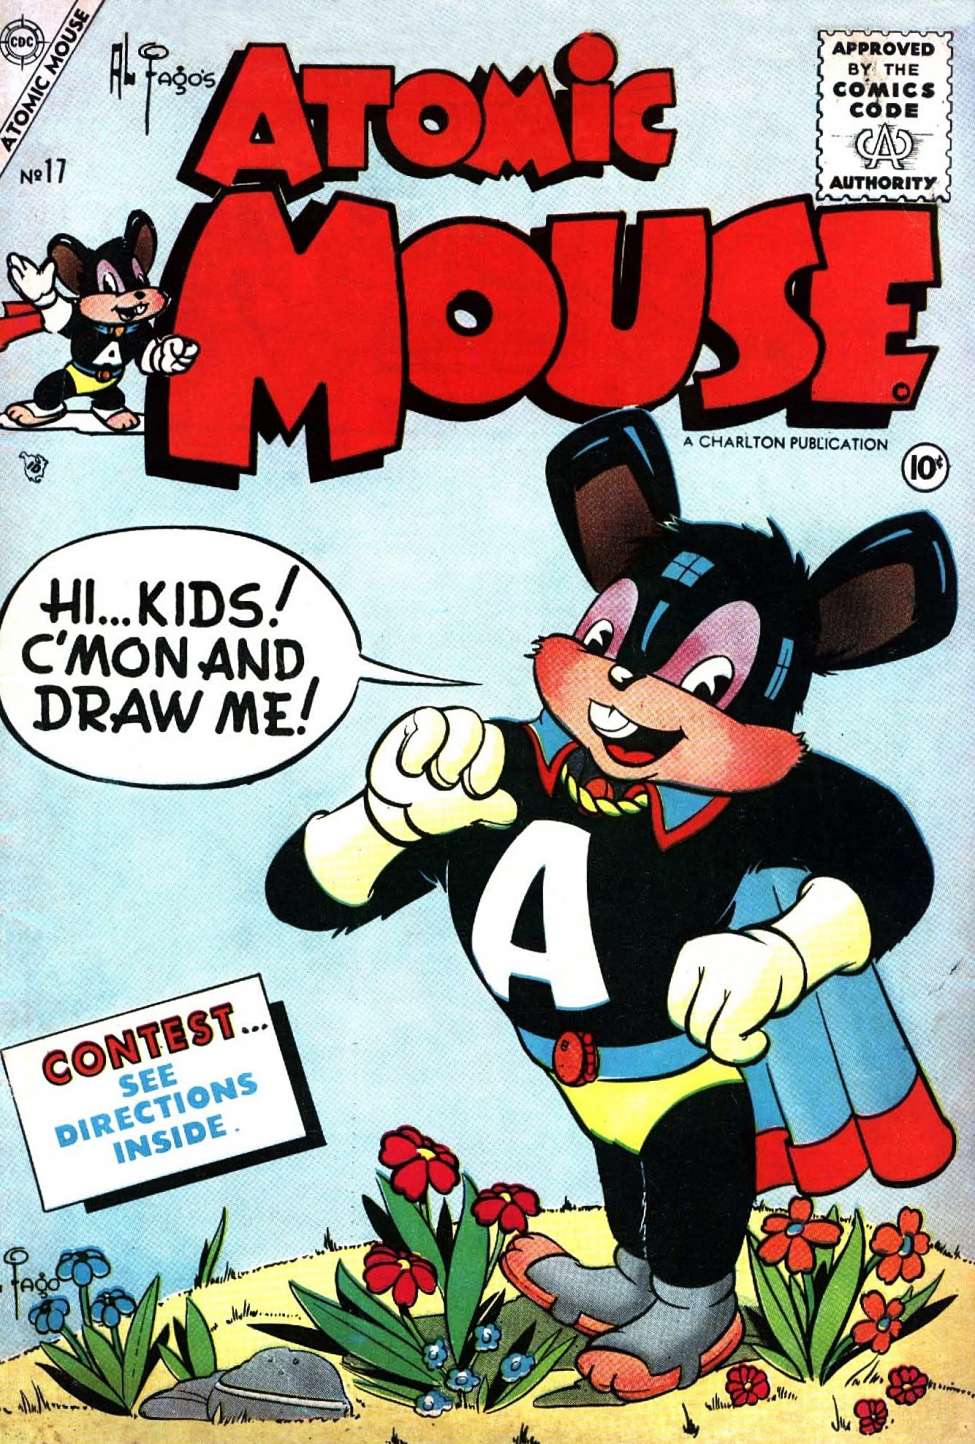 Book Cover For Atomic Mouse 17